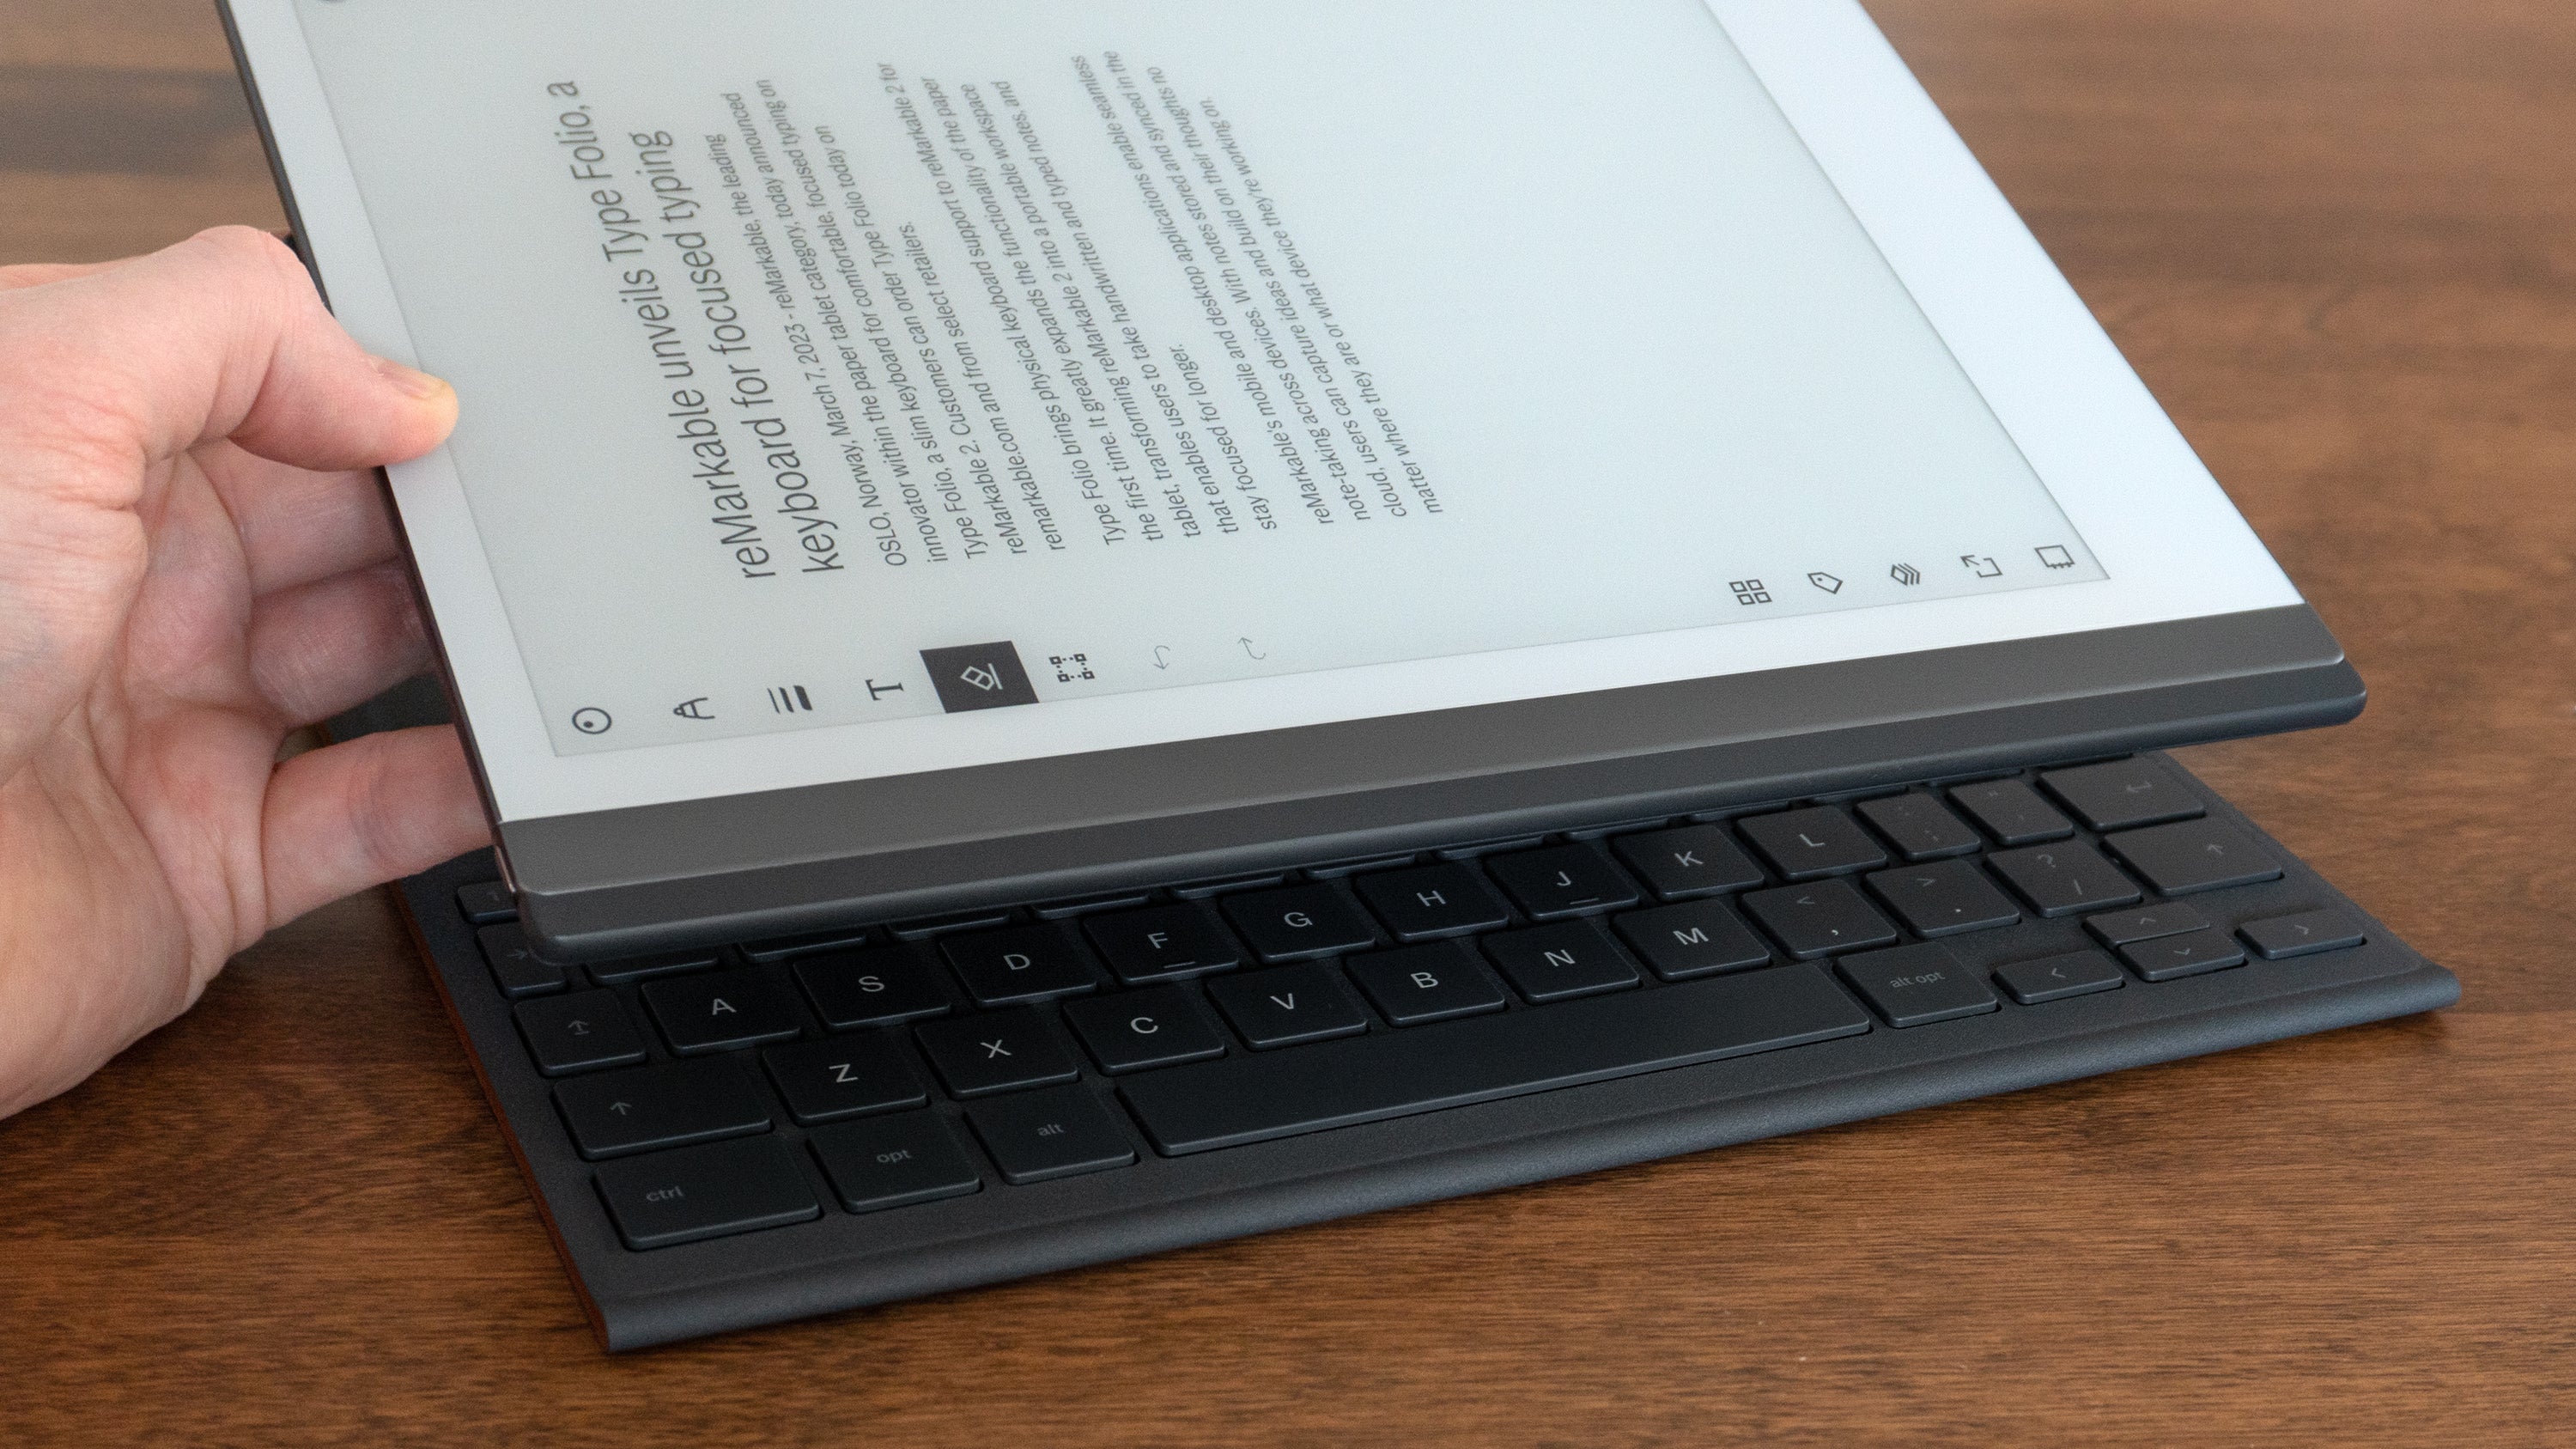 With the Type Folio's keyboard hidden beneath the e-note when folded away, greasy fingerprint-covered keys won't be pressed up against your device's screen. (Photo: Andrew Liszewski | Gizmodo)